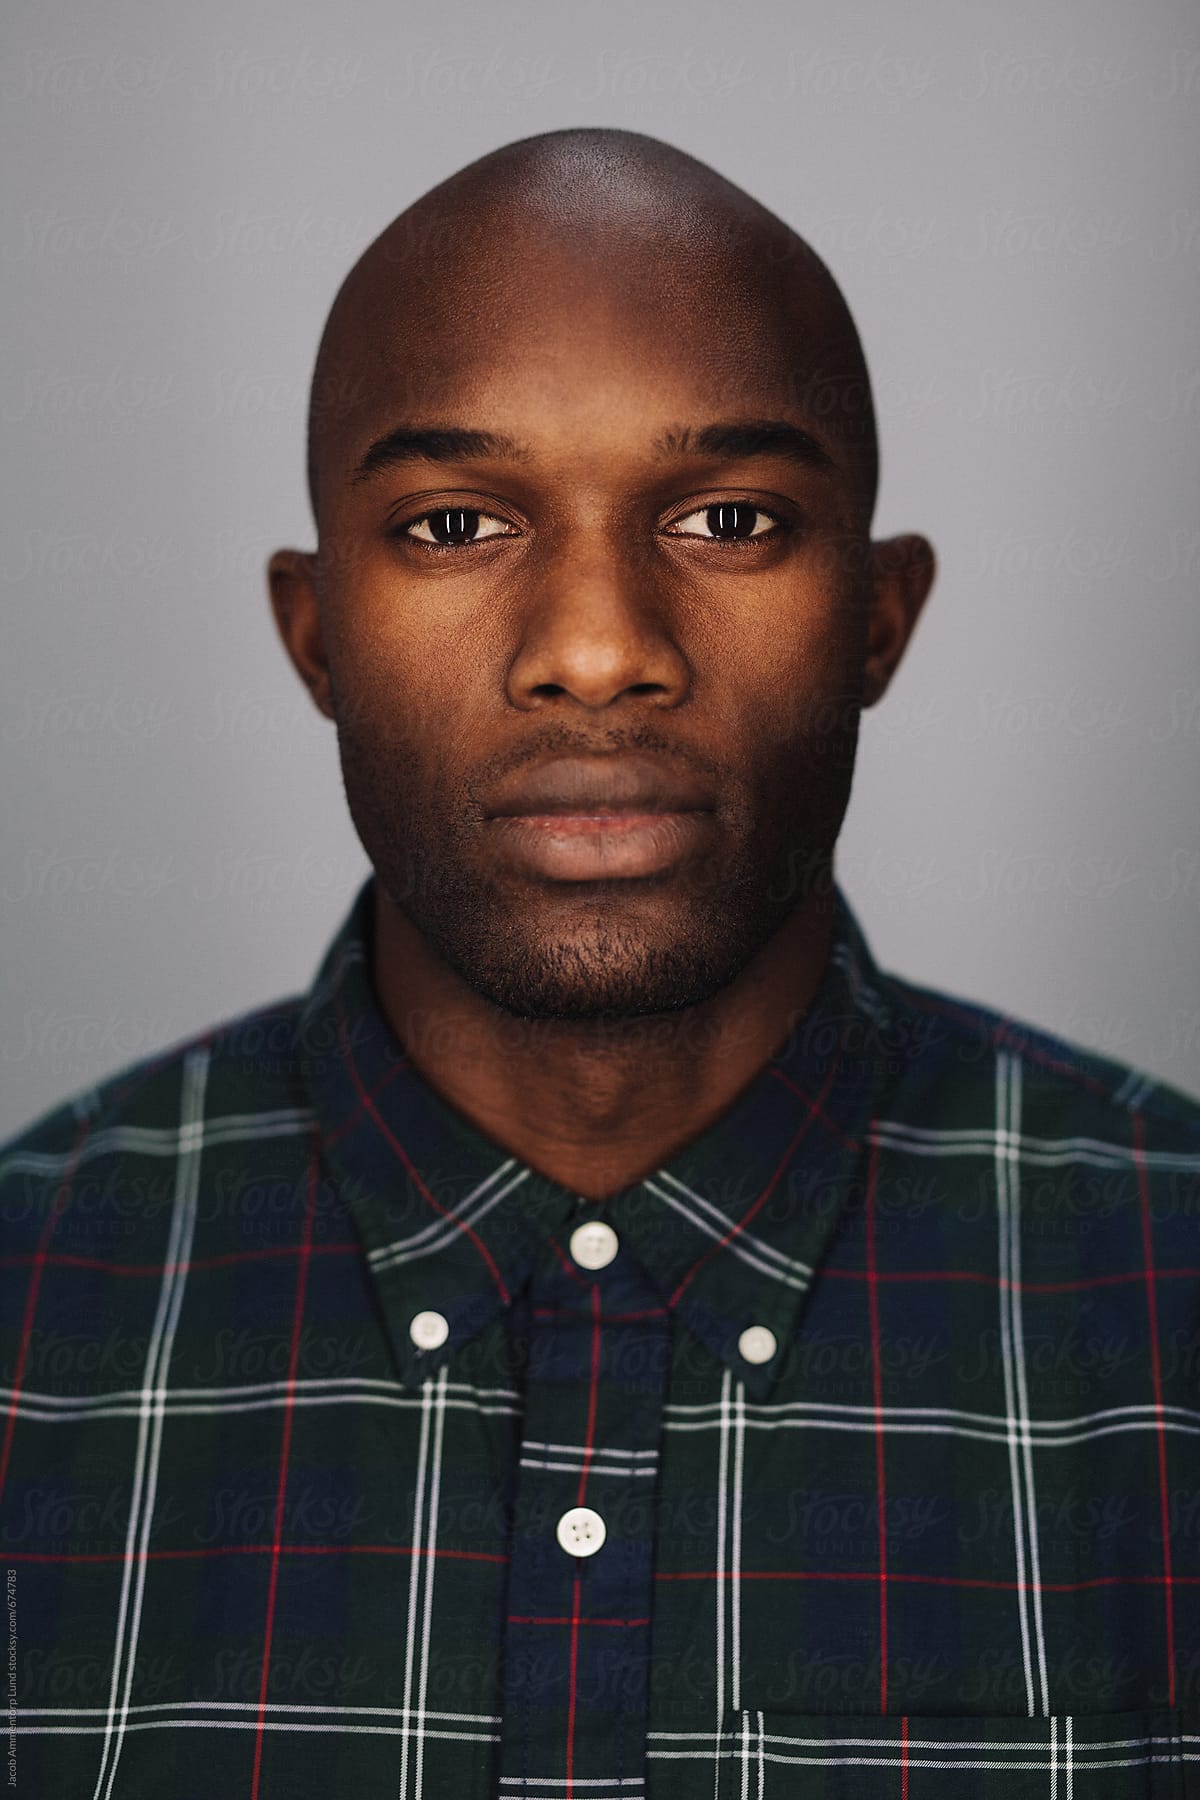 "Close Up Of A Black Young Man Looking At Camera" by Stocksy Contributor "Jacob Lund" - Stocksy